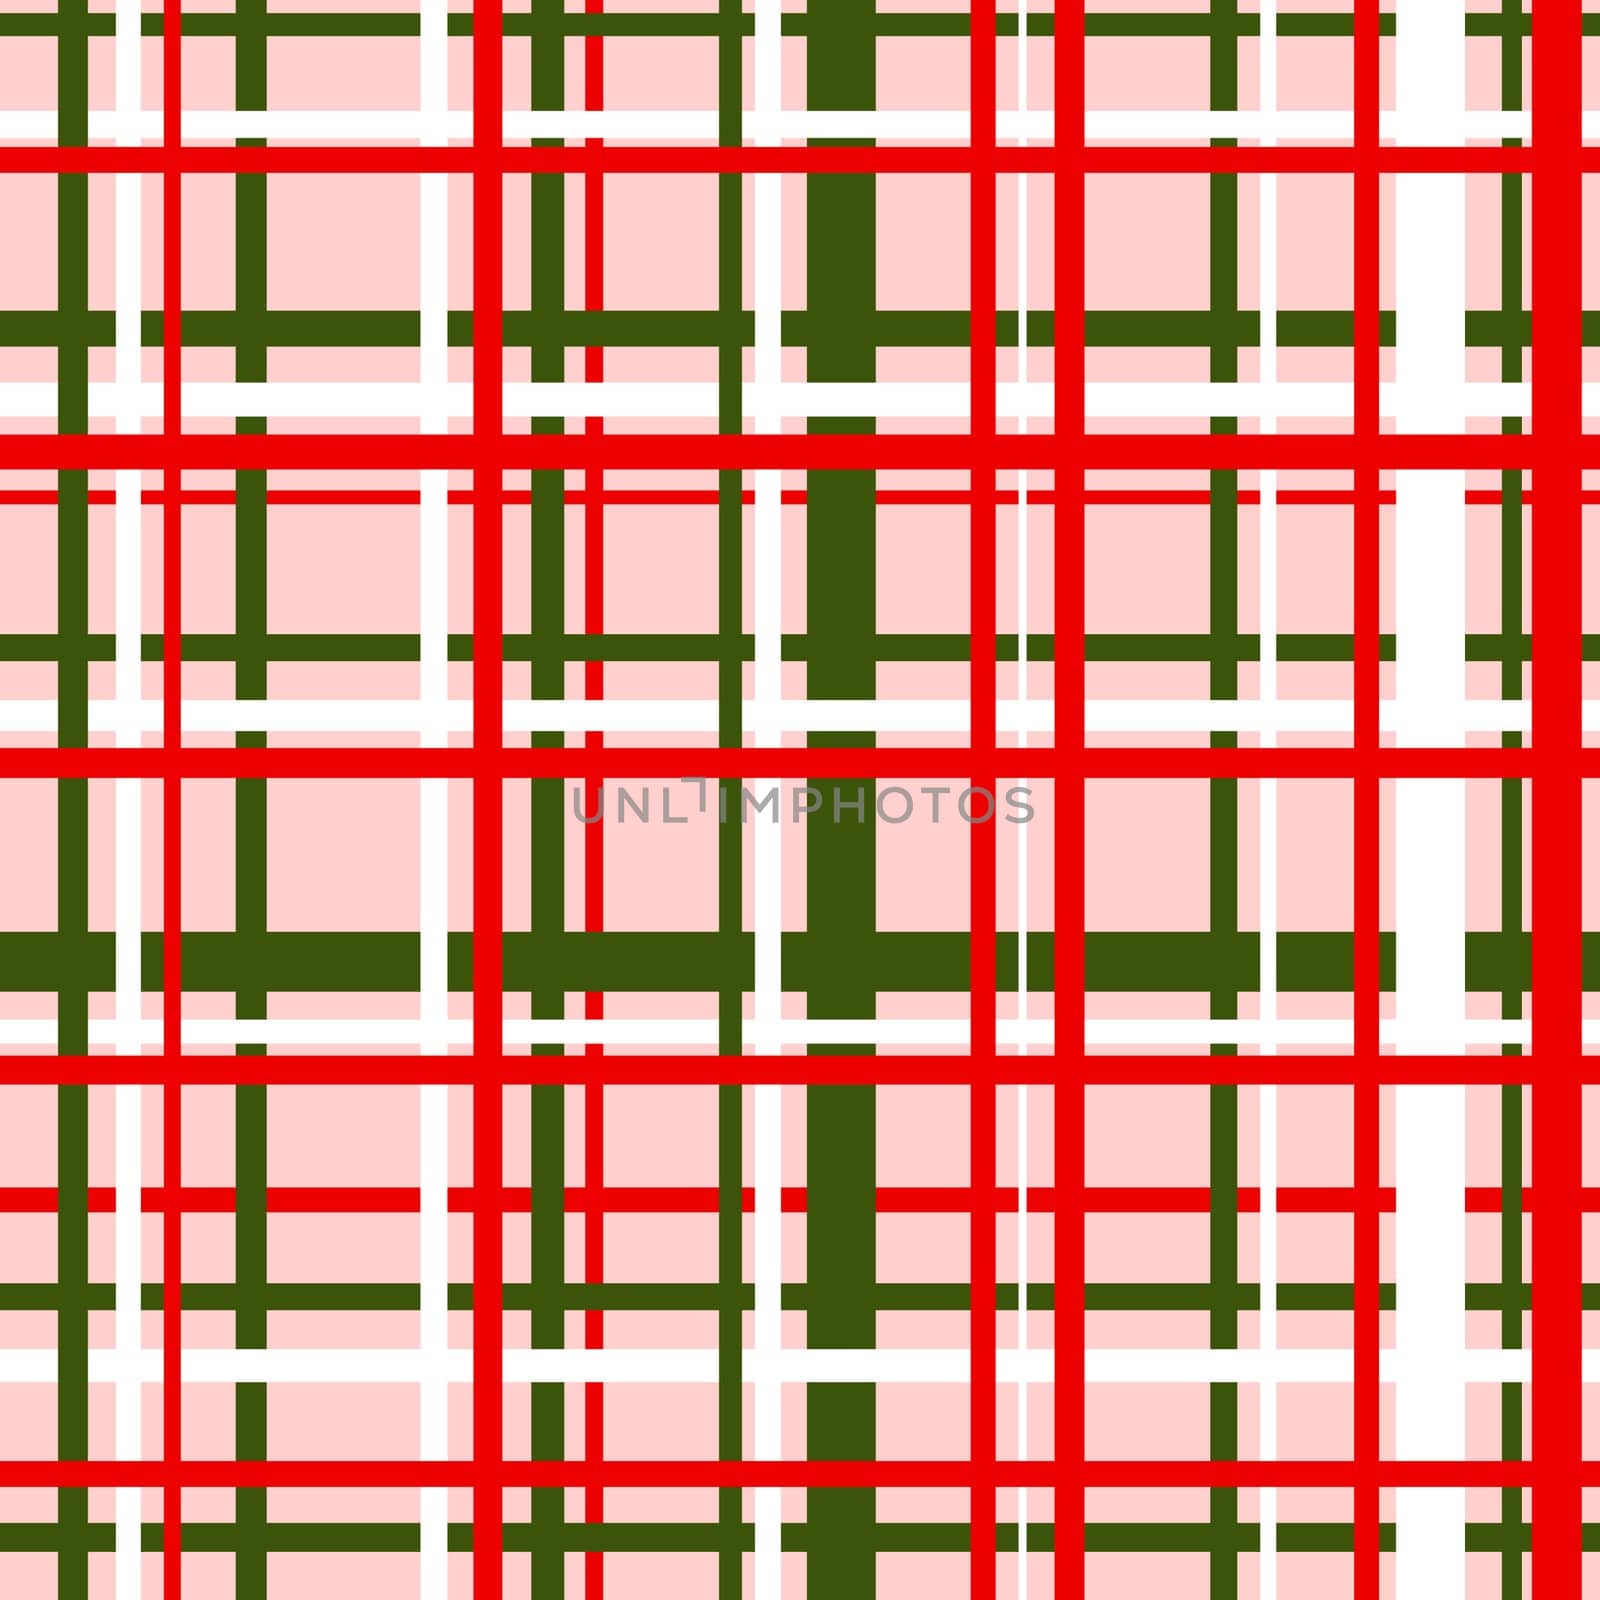 Hand drawn seamless pattern of plaid tartan checkered textile print in red green white Christmas. Checks squares lines in abstract geometric modern colorful design. For wallpaper classic nursery decor